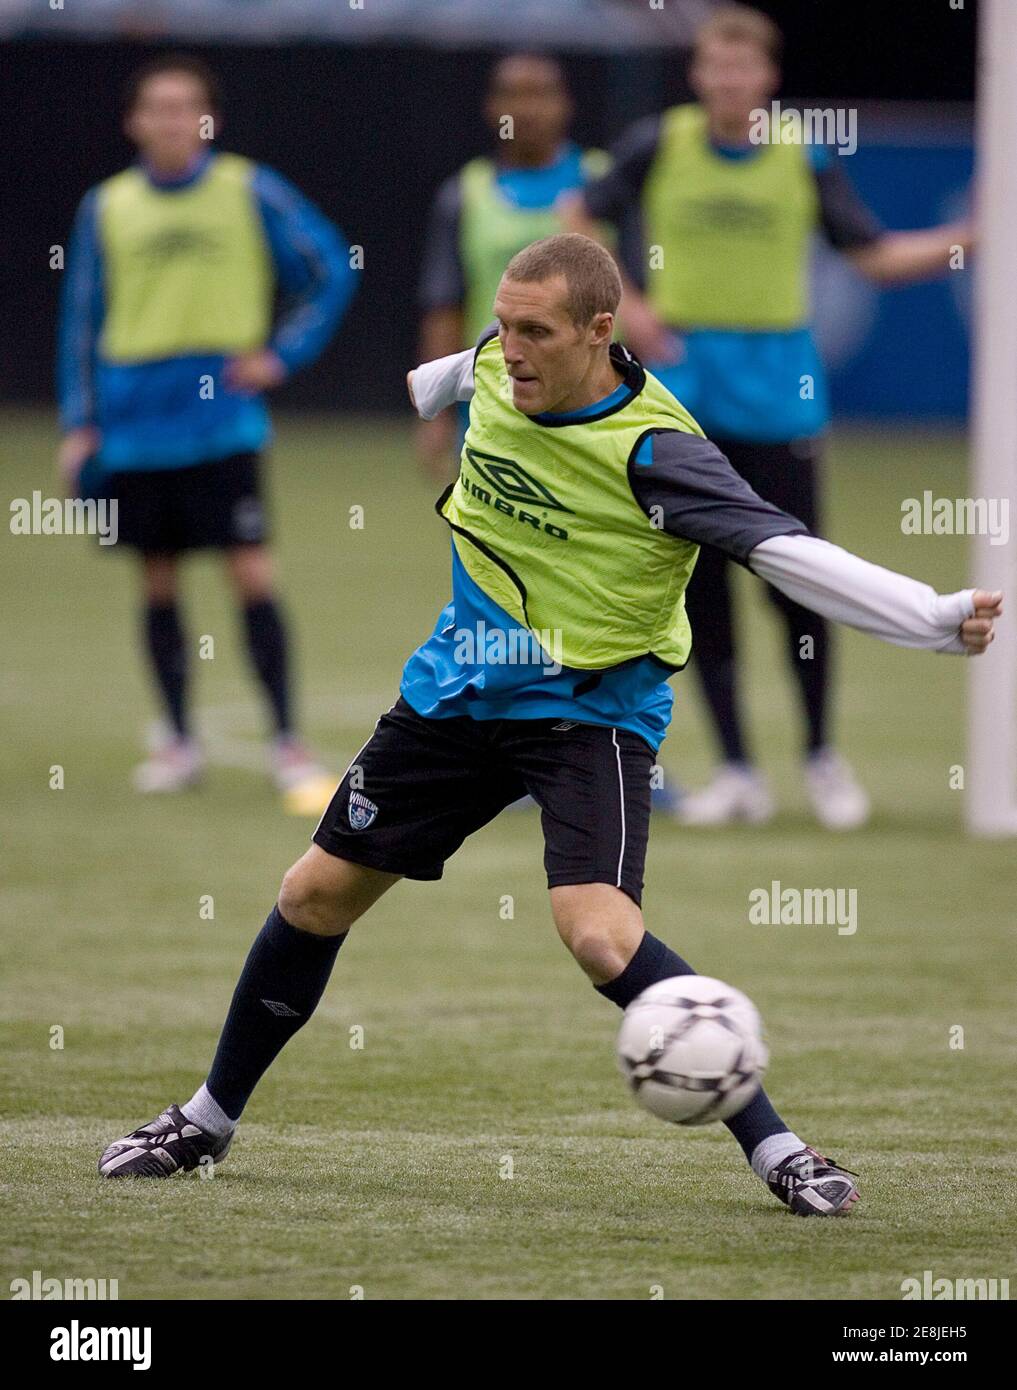 Vancouver Whitecaps' Martin Nash, brother of NBA player Steve Nash of the Phoenix Suns, takes part in a soccer training session at BC Place in Vancouver, British Columbia November 6, 2007. The Whitecaps will take on the Los Angeles Galaxy in an exhibition game Wednesday.      REUTERS/Andy Clark        (CANADA) Stock Photo